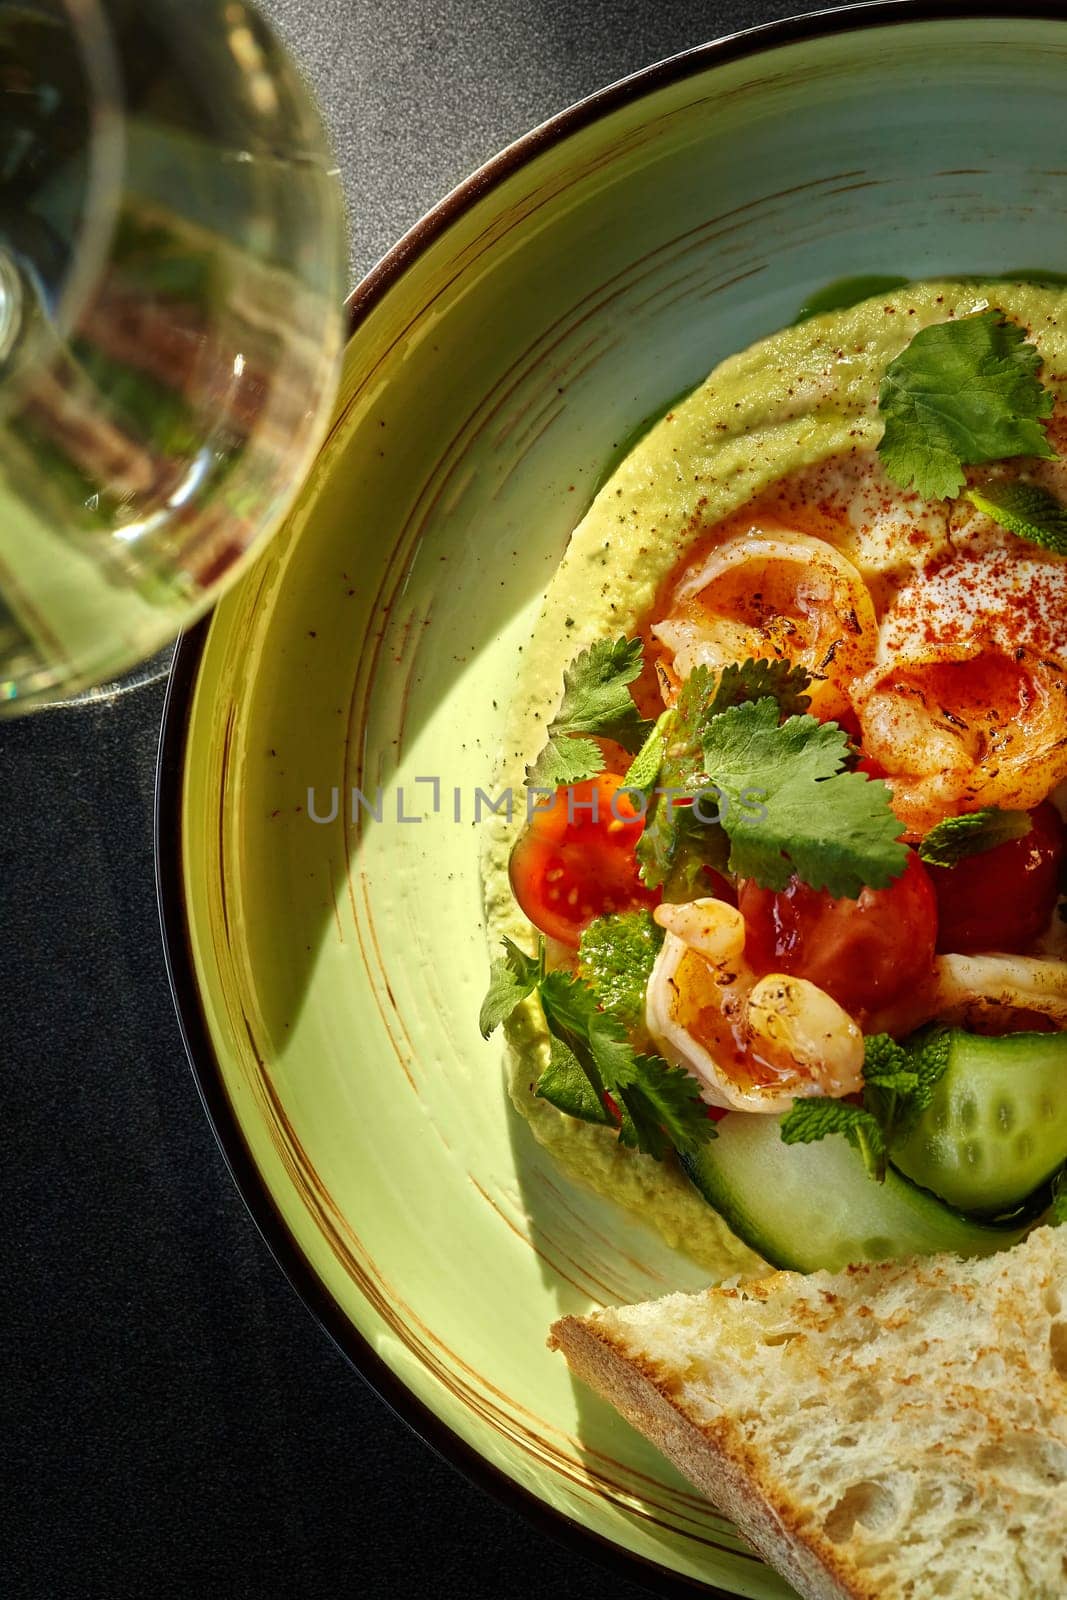 Delicate creamy hummus topped with succulent fried shrimps, fresh cherry tomatoes, cucumber slices and herbs served on ceramic plate with browned toast and glass of wine